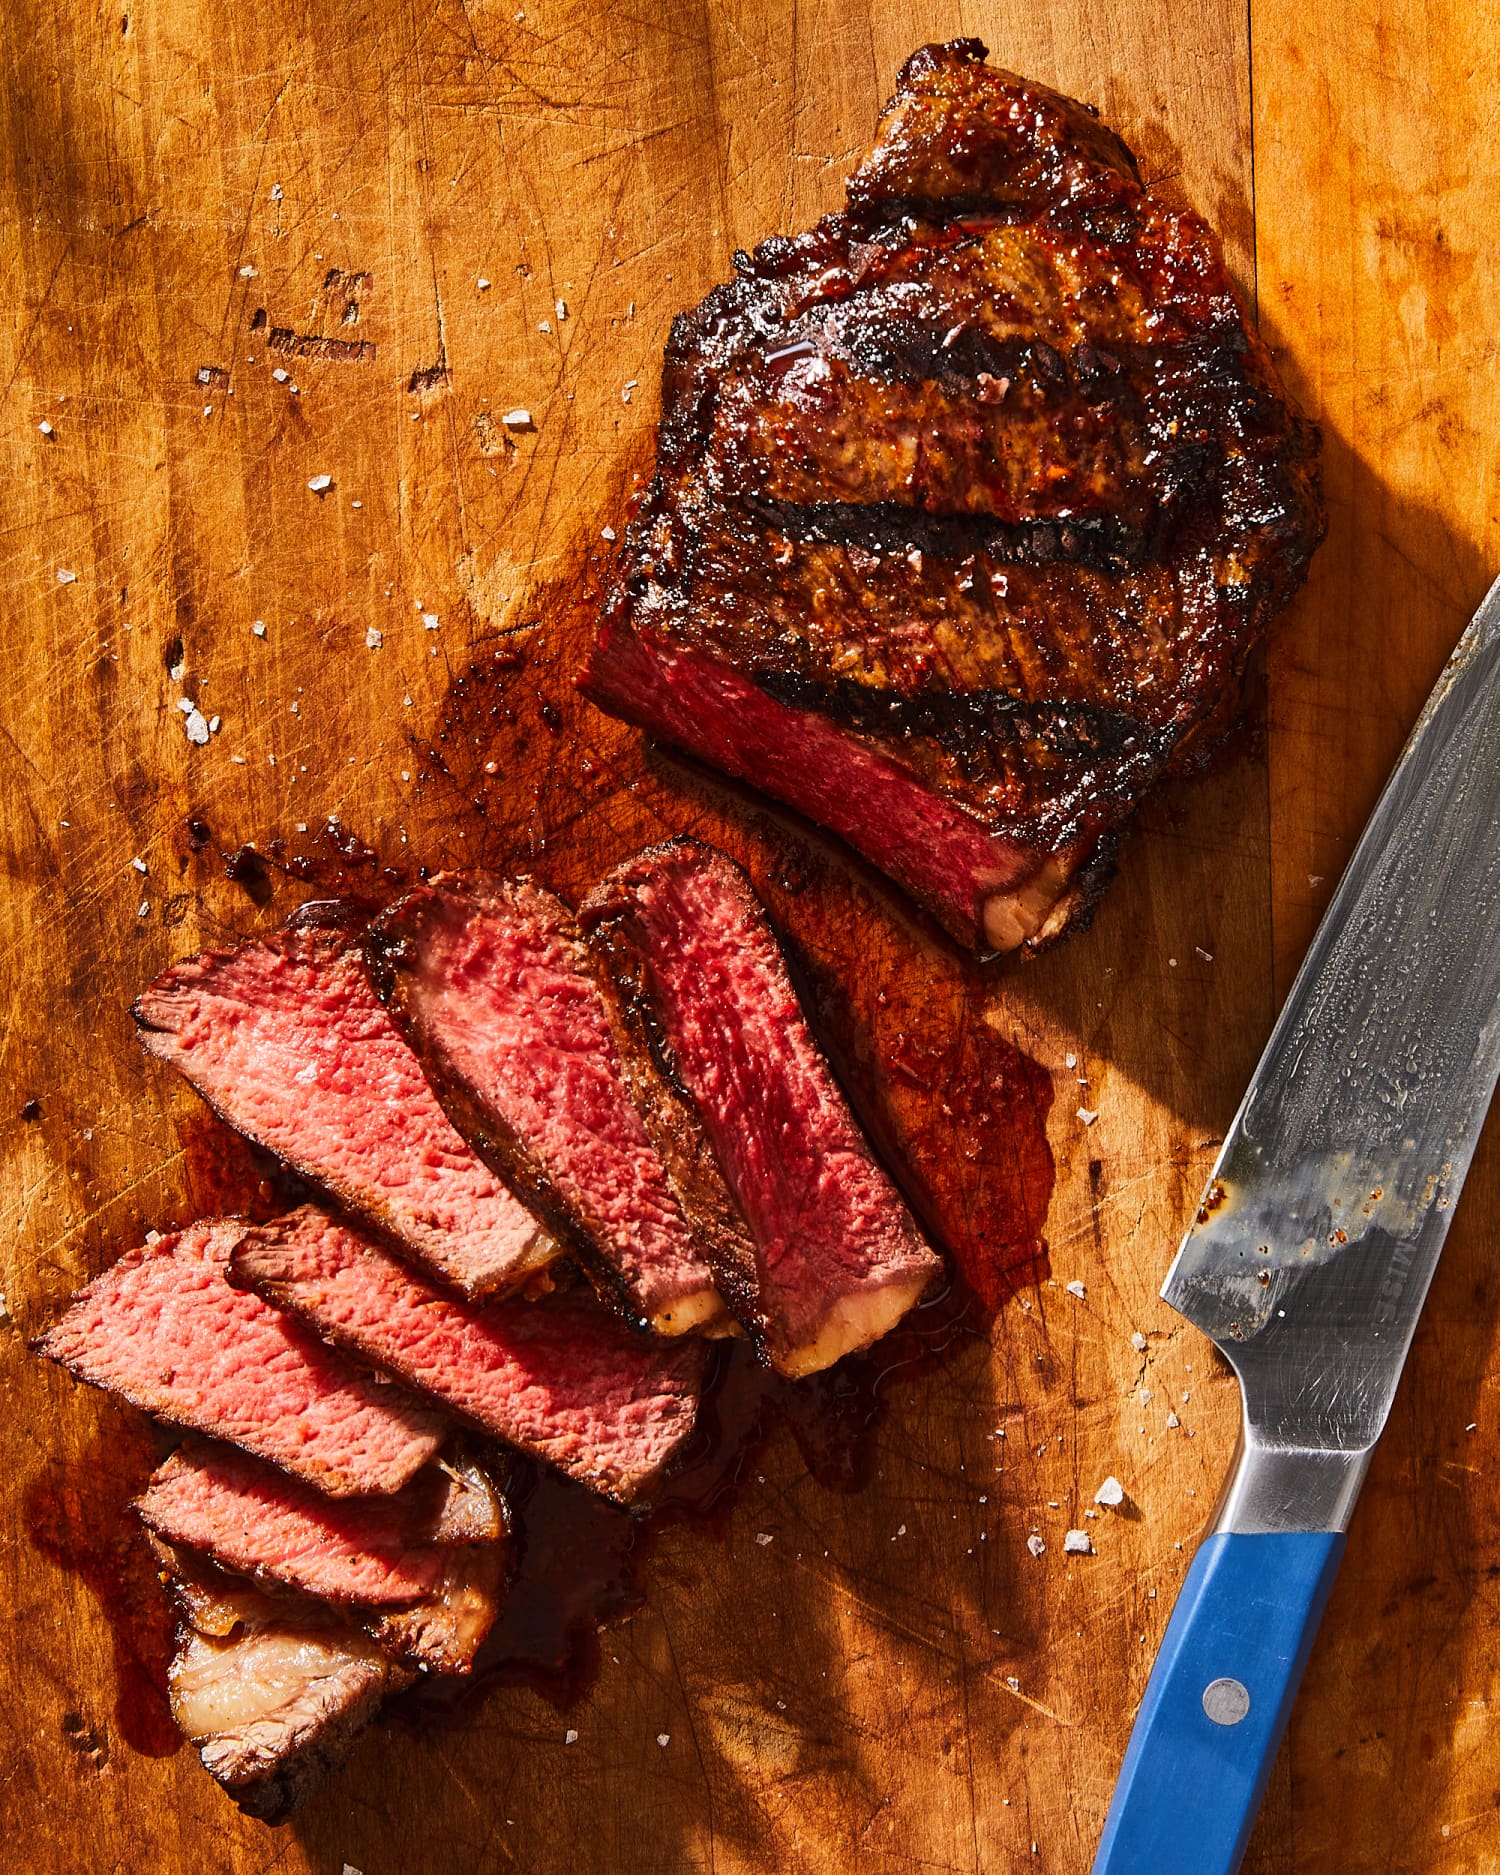 For Perfectly Grilled Steak, Add This Ingredient to Your Spice Rub